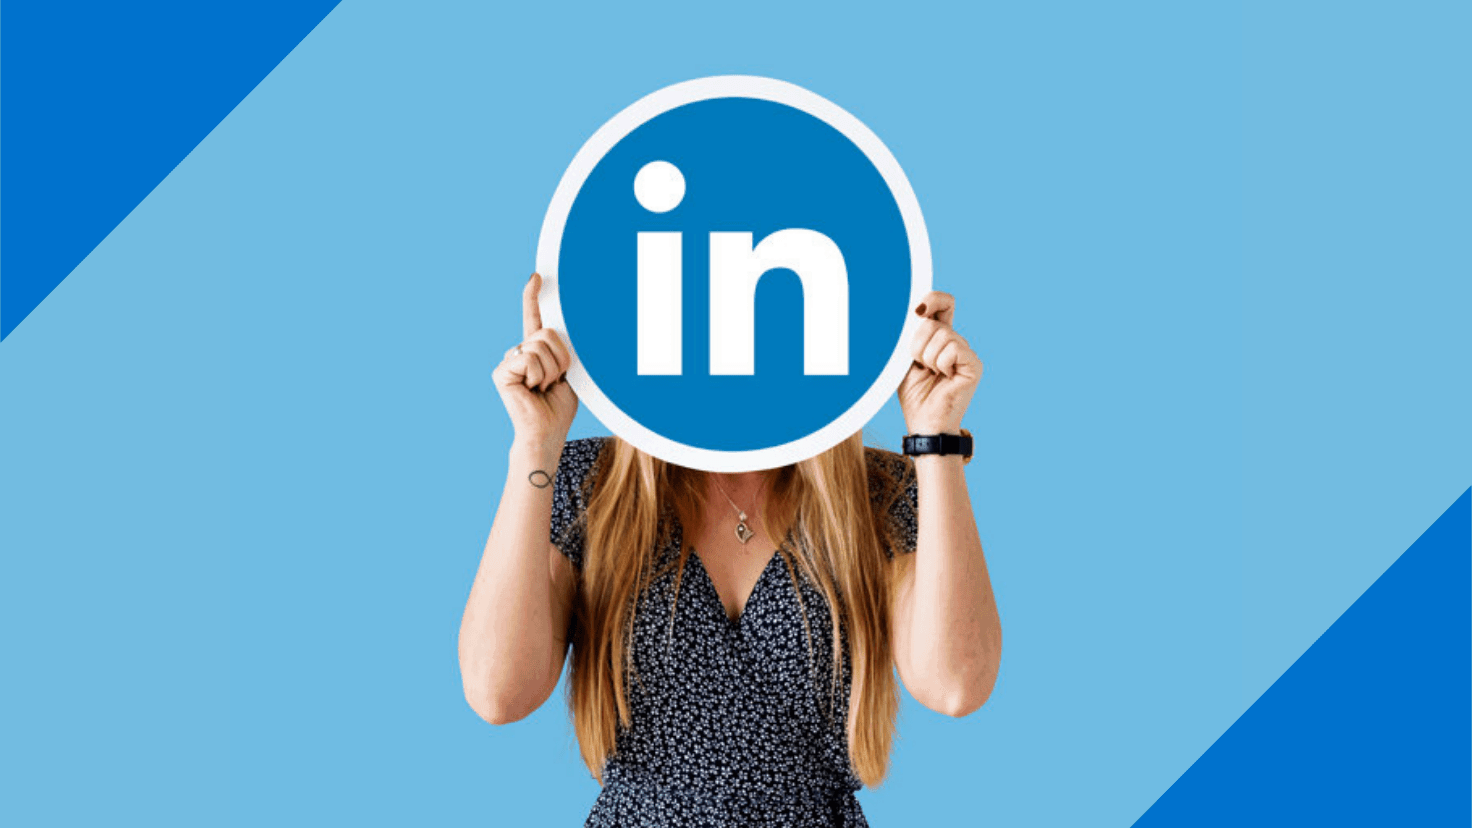 Add eLearning Certifications to Your LinkedIn Profile